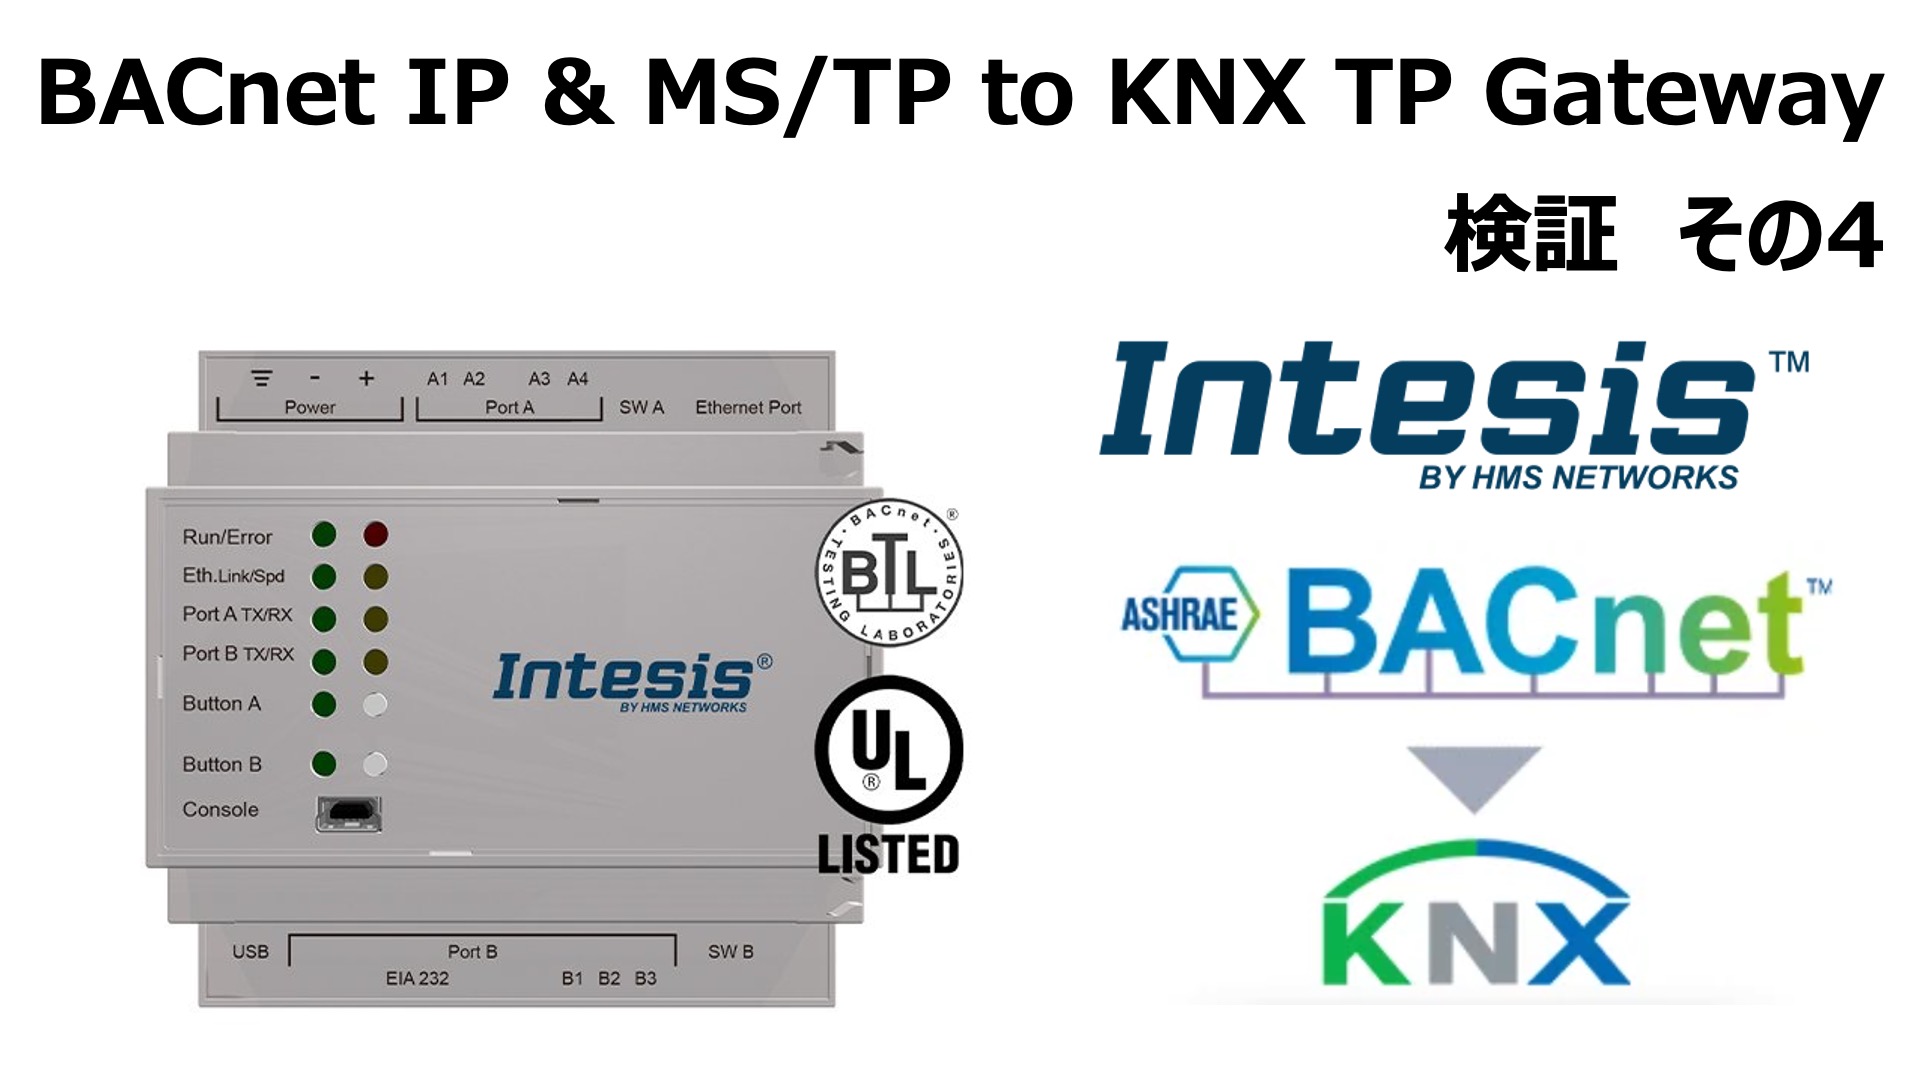 INTESIS BACnet IP & MS/TP Client to KNX TP Gateway 検証その4: Intesis MAPS